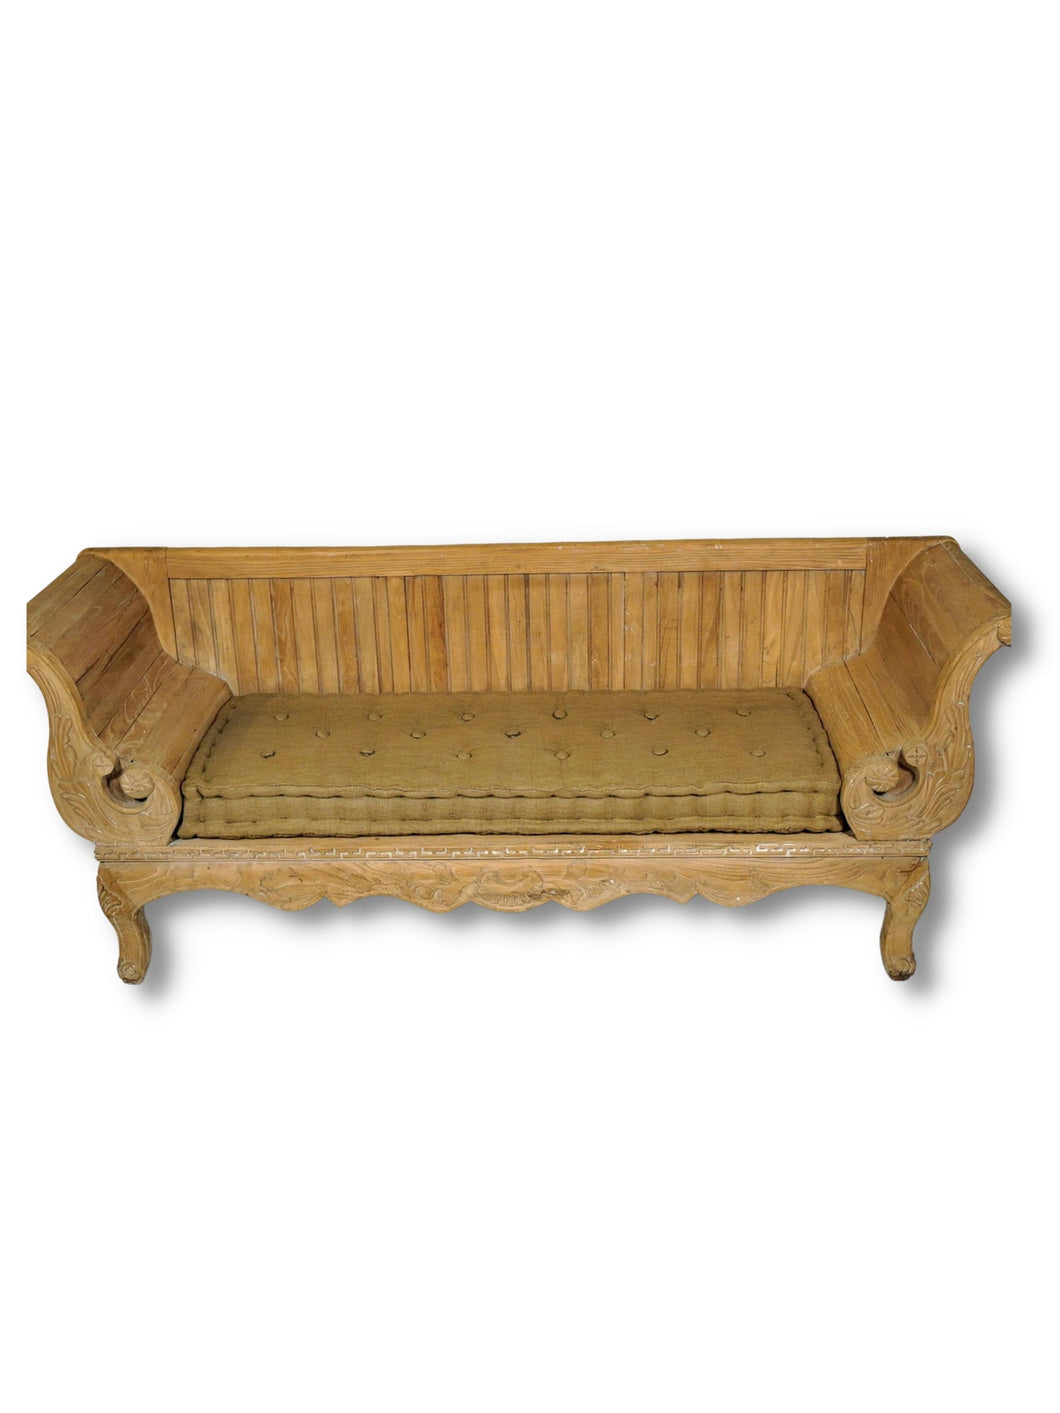 Antique Stripped Pine Settee